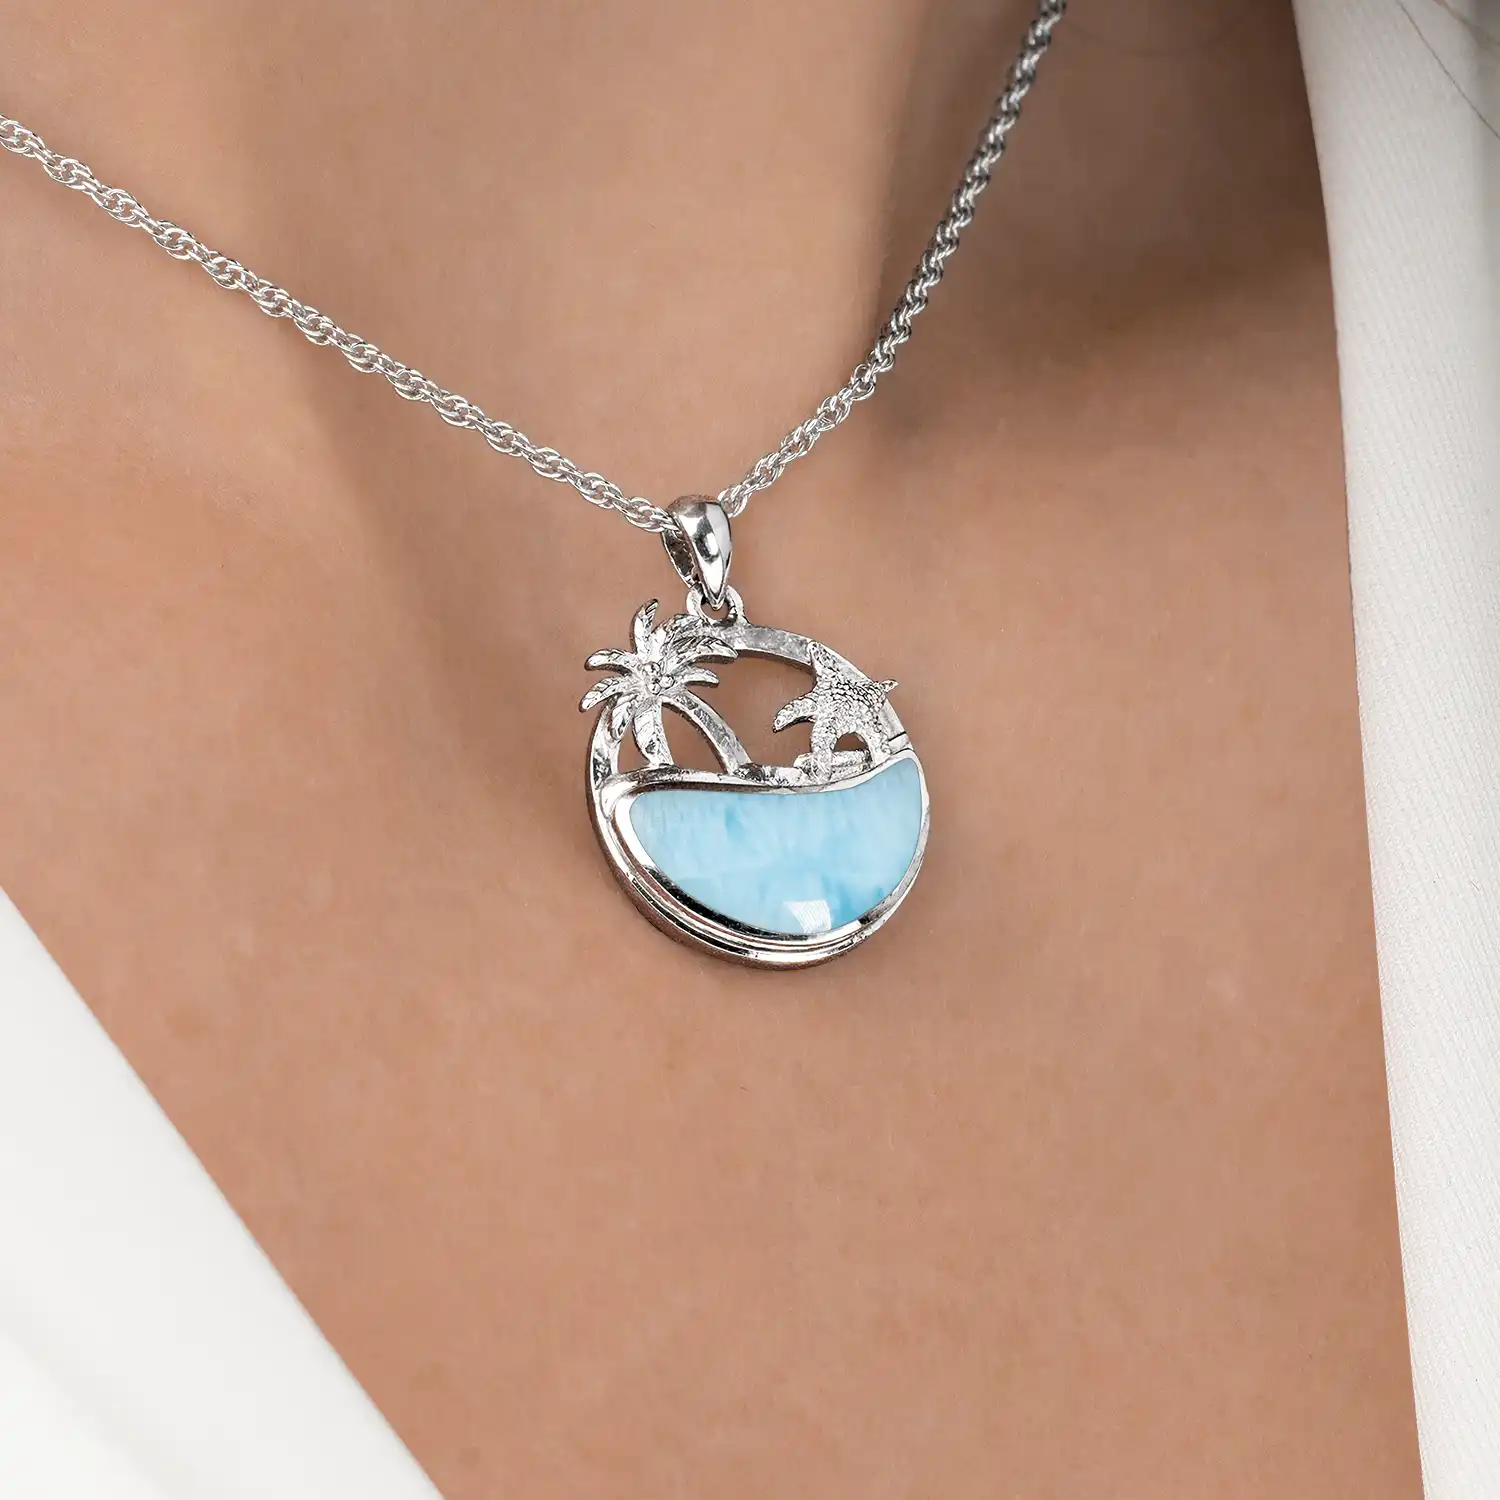 Beachy Necklace with larimar by Marahlago 